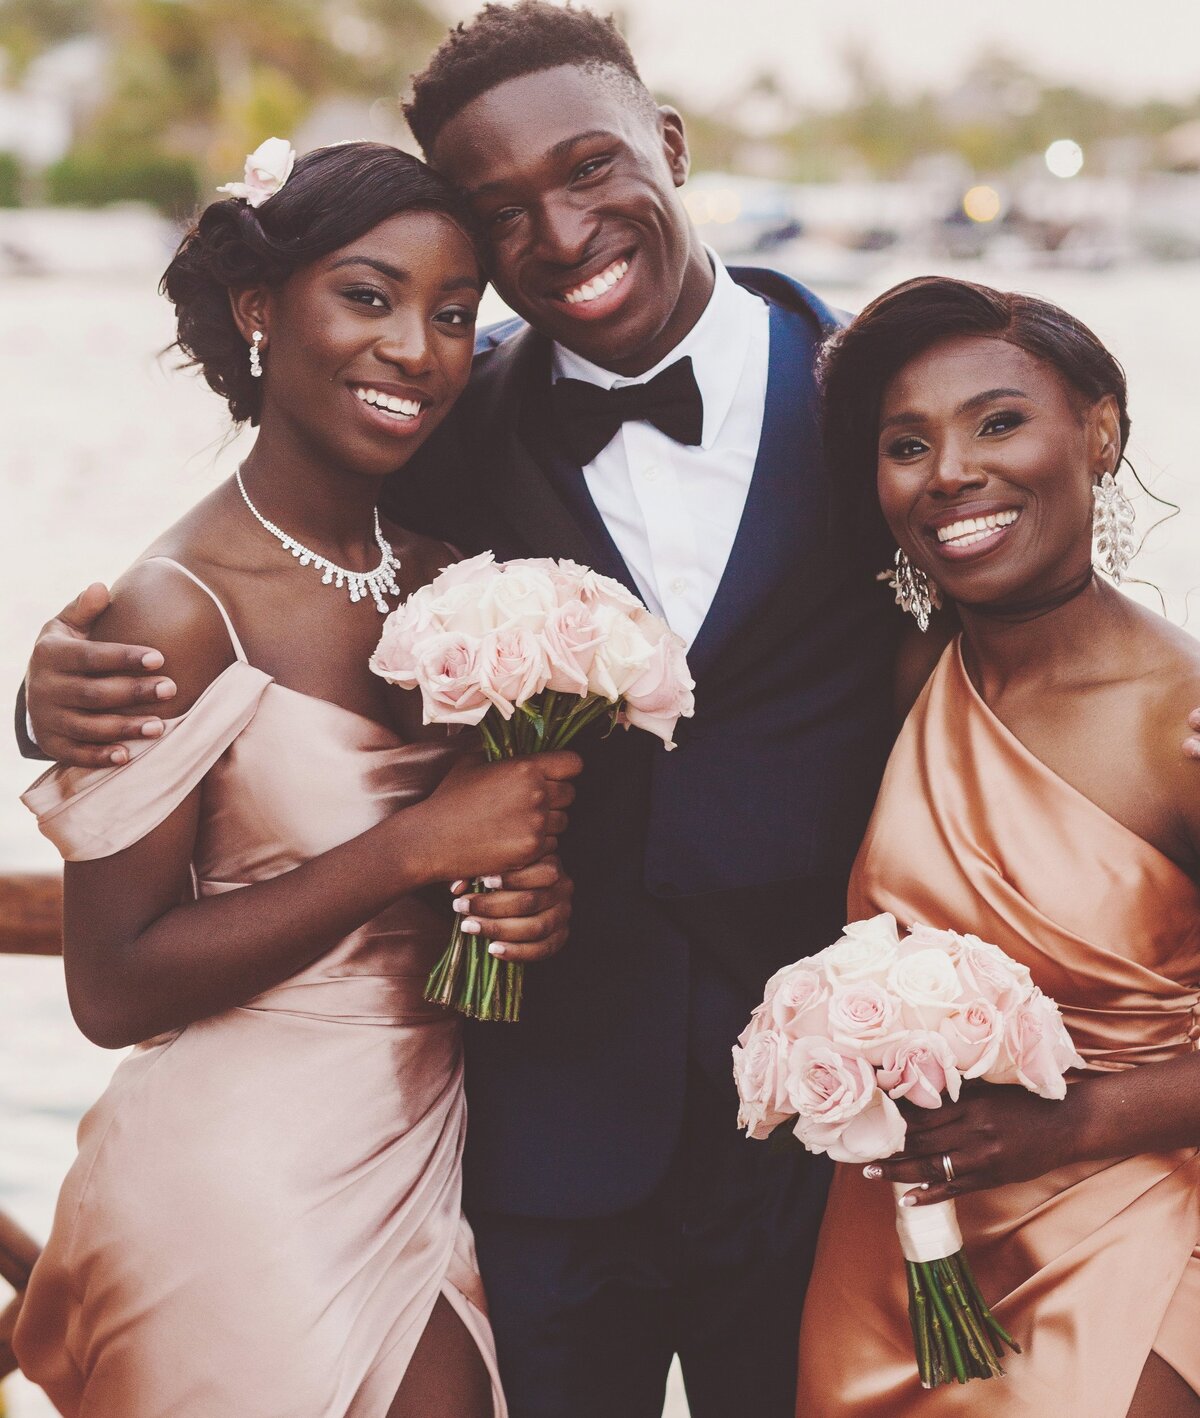 Groomsman with two bridesmaids at wedding in Cancun